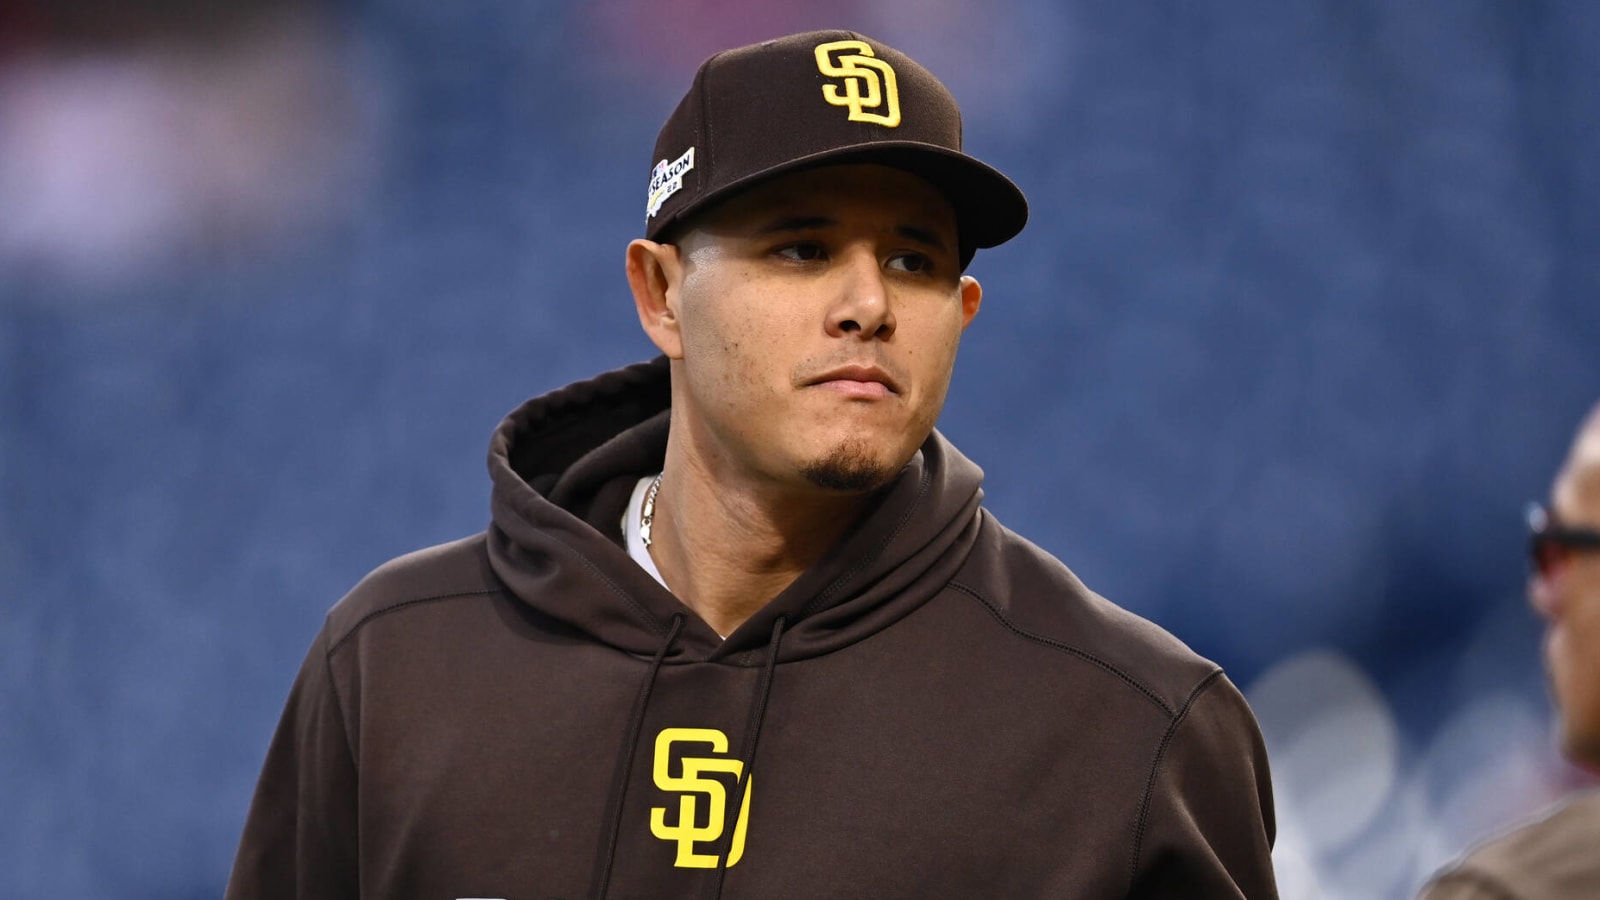 Manny Machado plans to opt out of contract after 2023 season